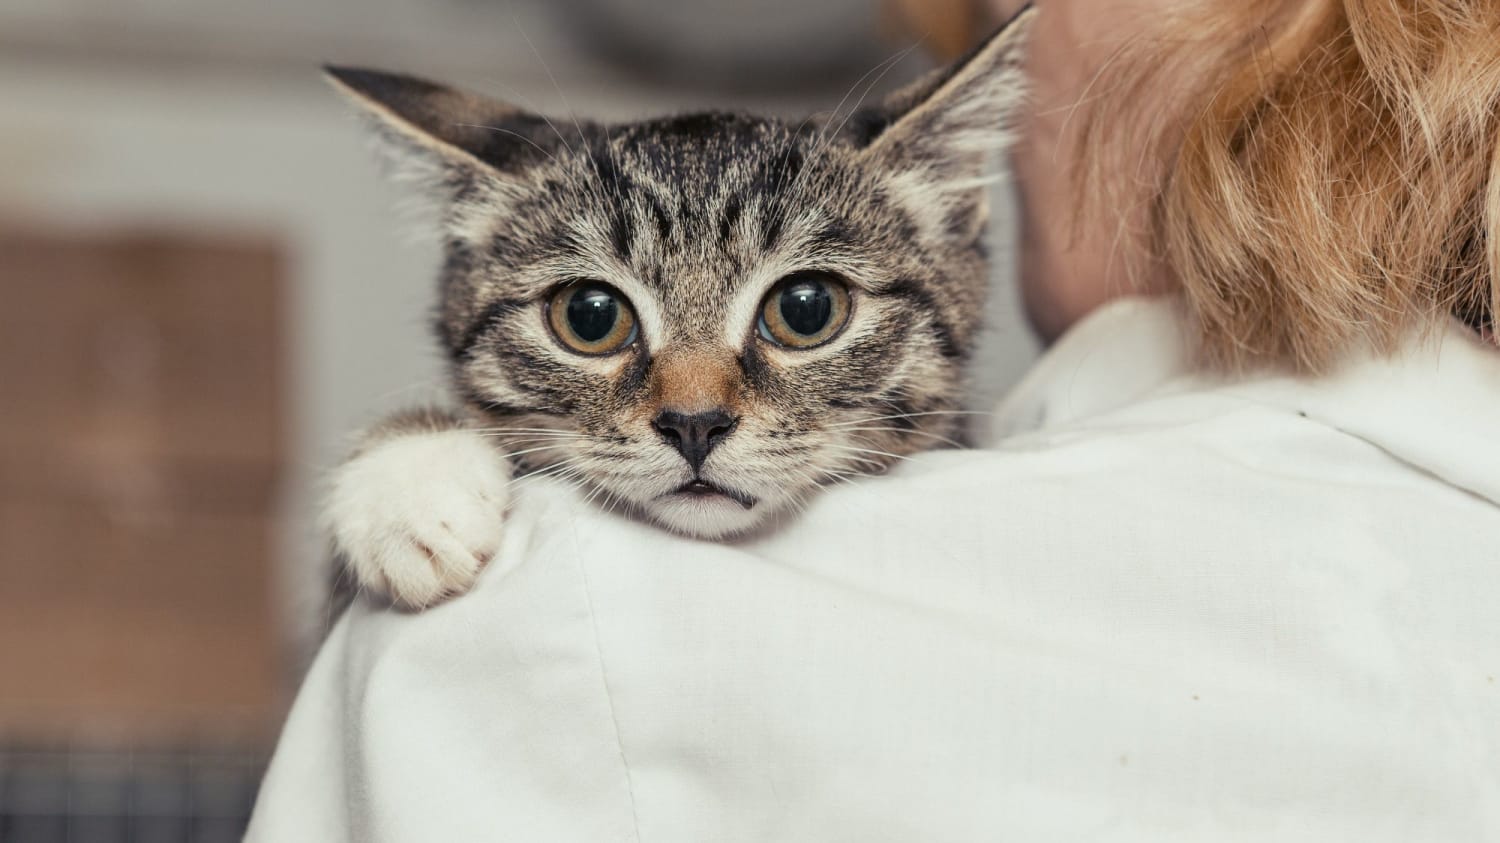 Why Cats Like to Shove Their Butts in Your Face, According to an Animal Behavior Expert